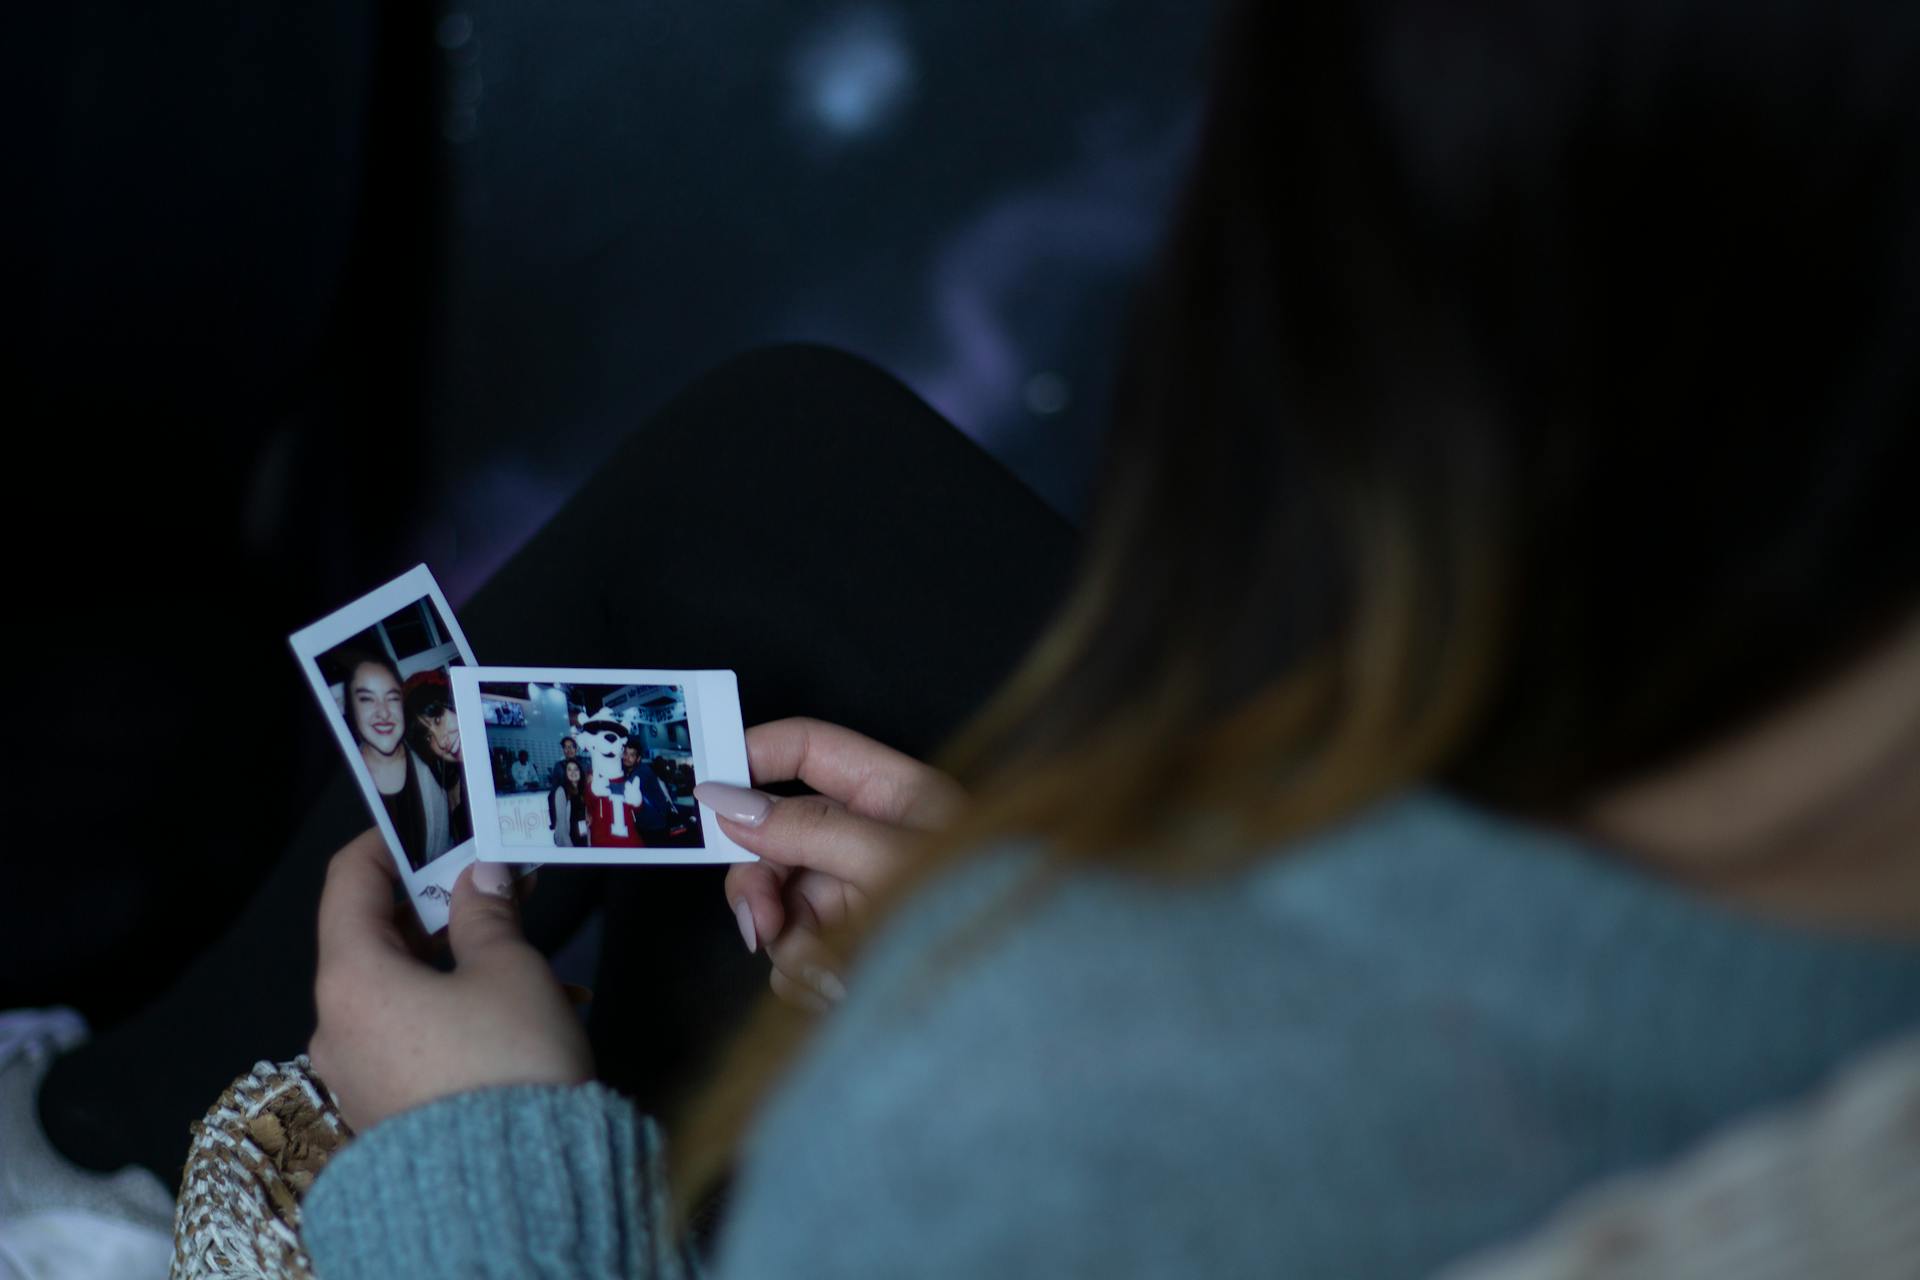 A woman holding two photos | Source: Pexels